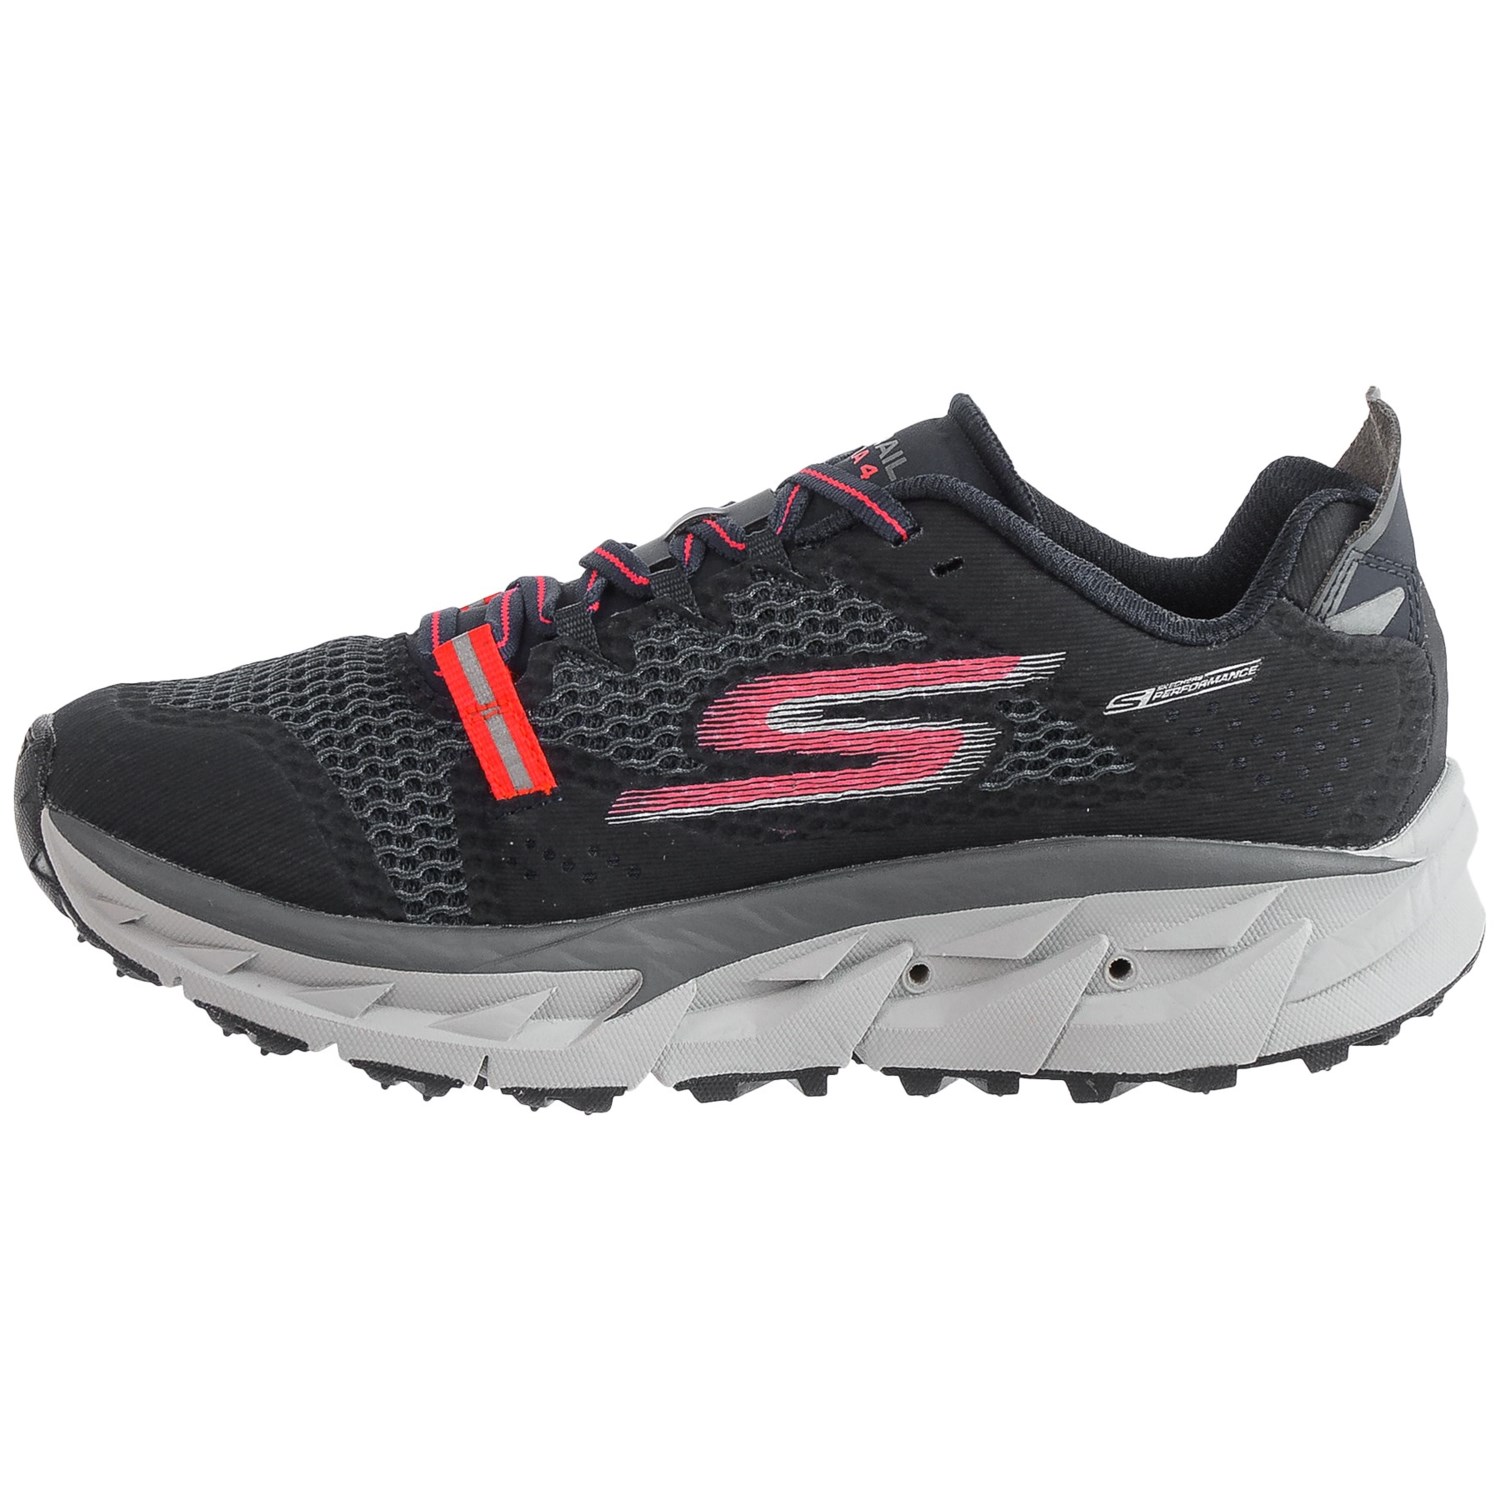 Skechers Trail Running Shoes Review : Skechers Running Shoes Womens ...